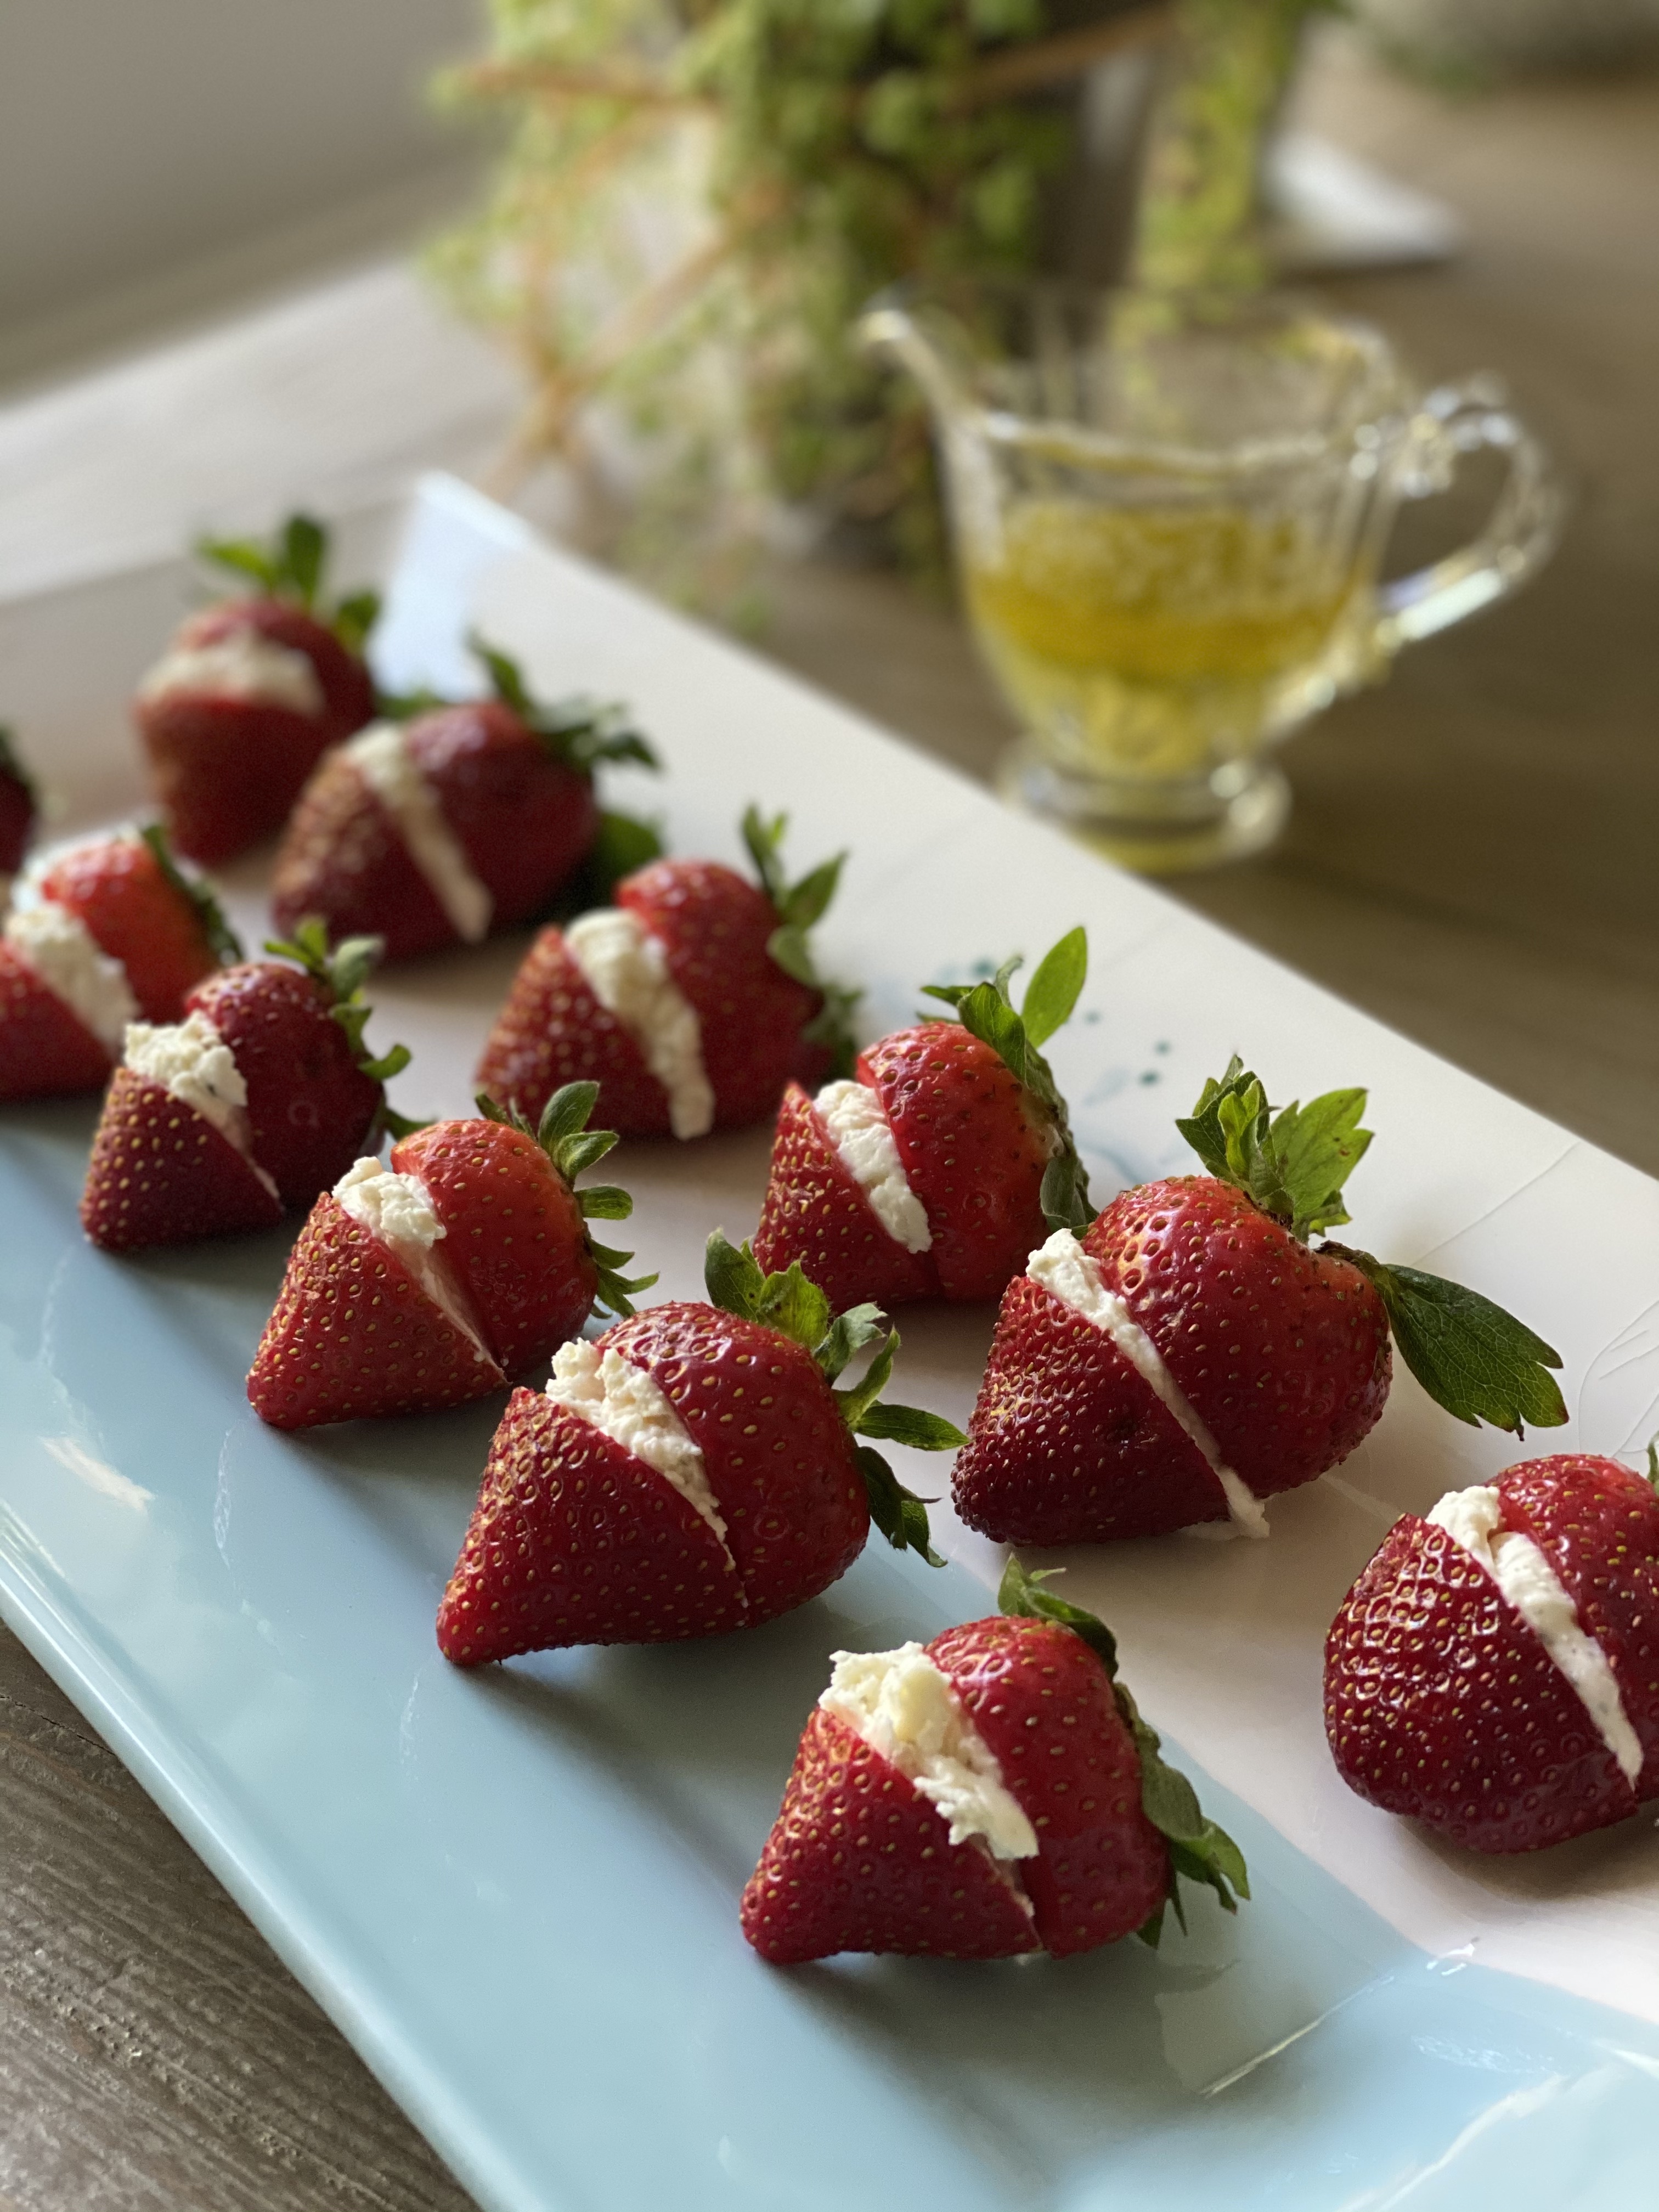 Strawberry Buttons Filled with an Herbed Goat Cheese Drizzled with a Lime Vinaigrette